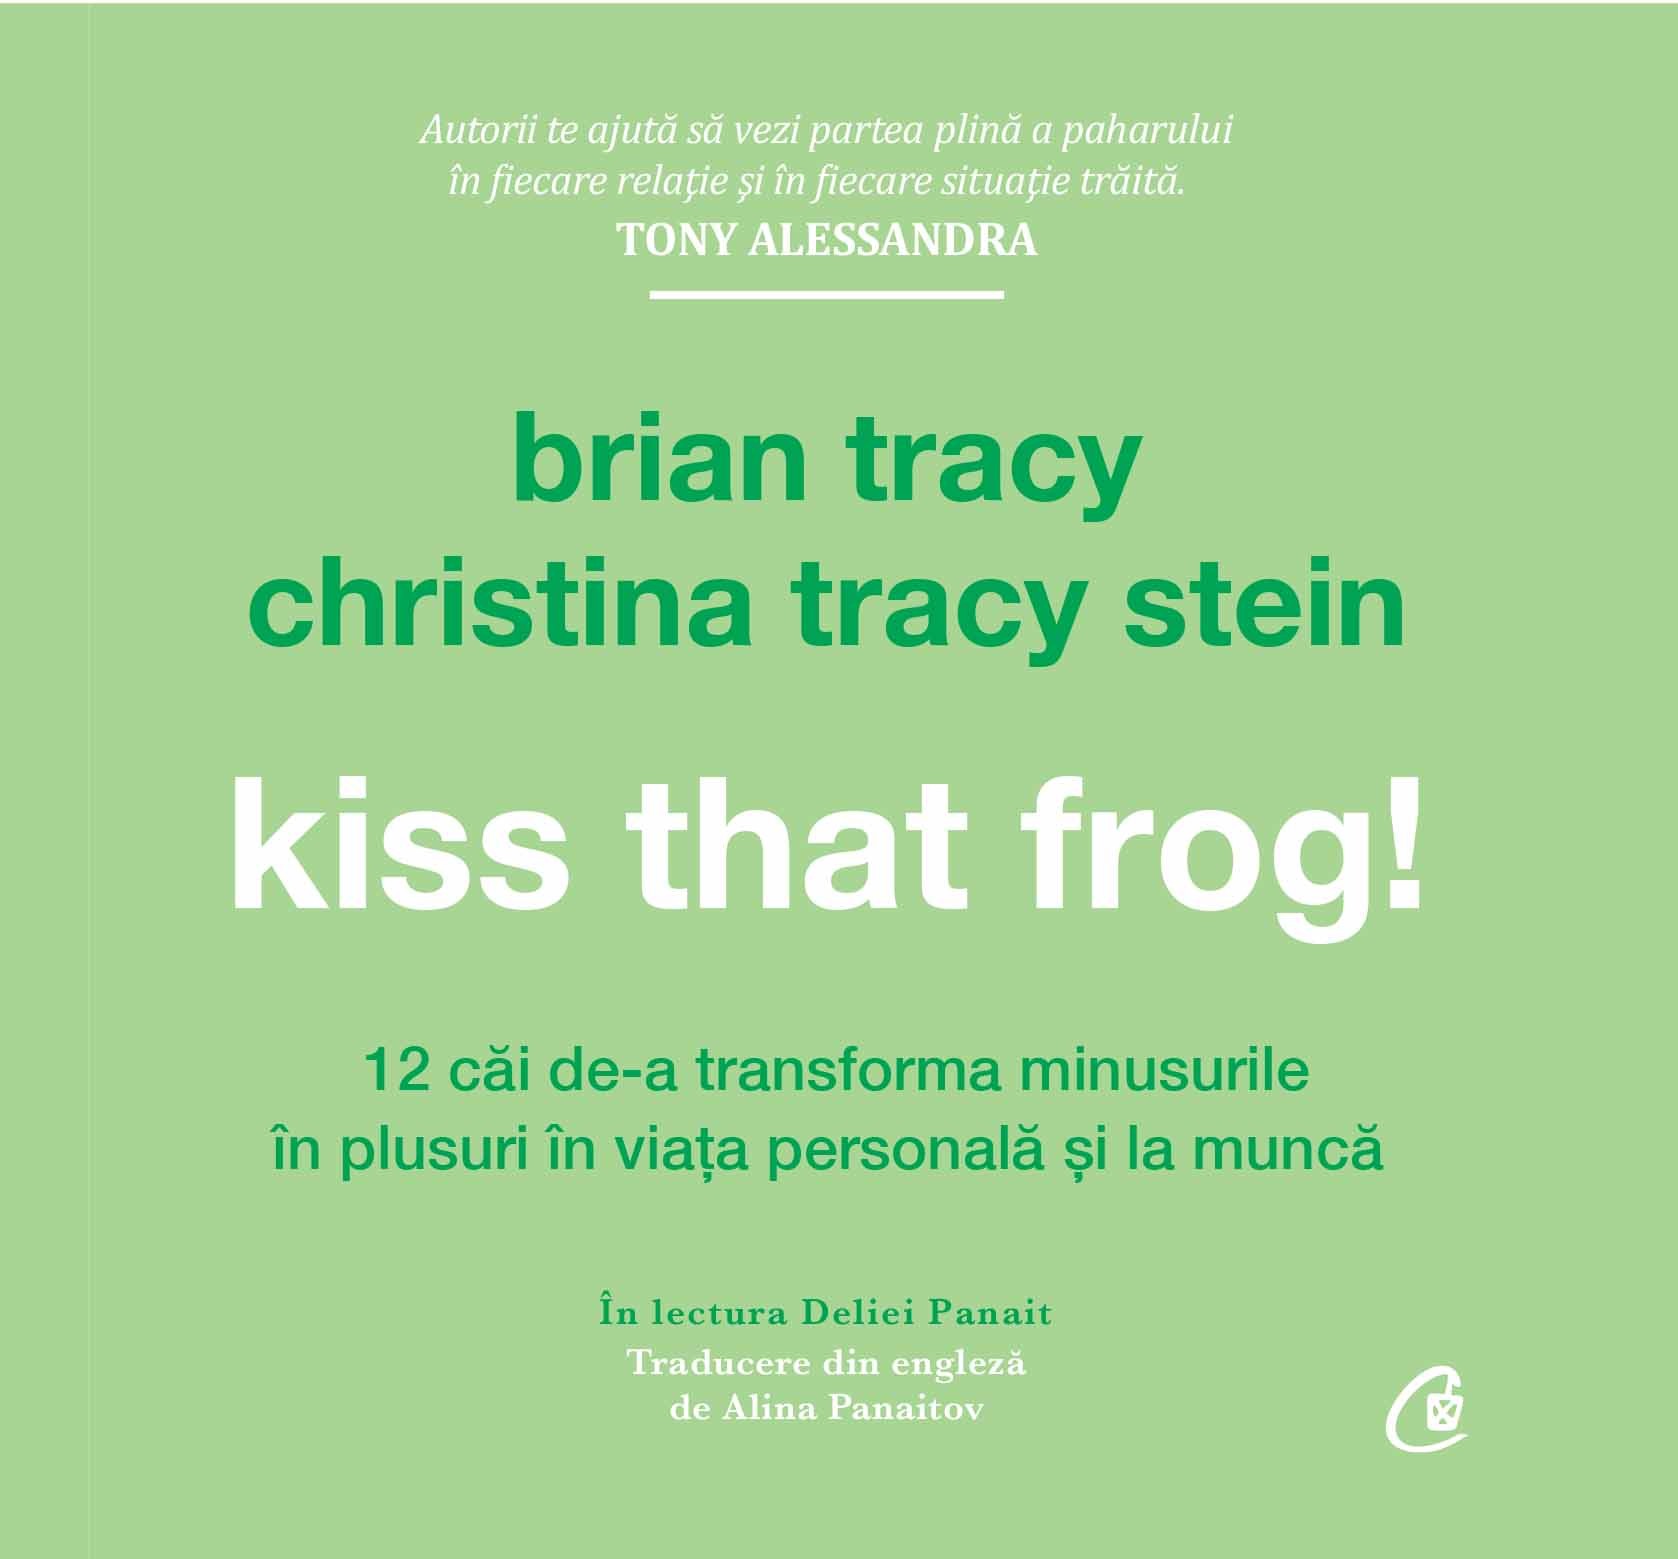 Kiss that frog! – Audiobook | Brian Tracy, Christina Tracy Stein Brian Tracy imagine 2021